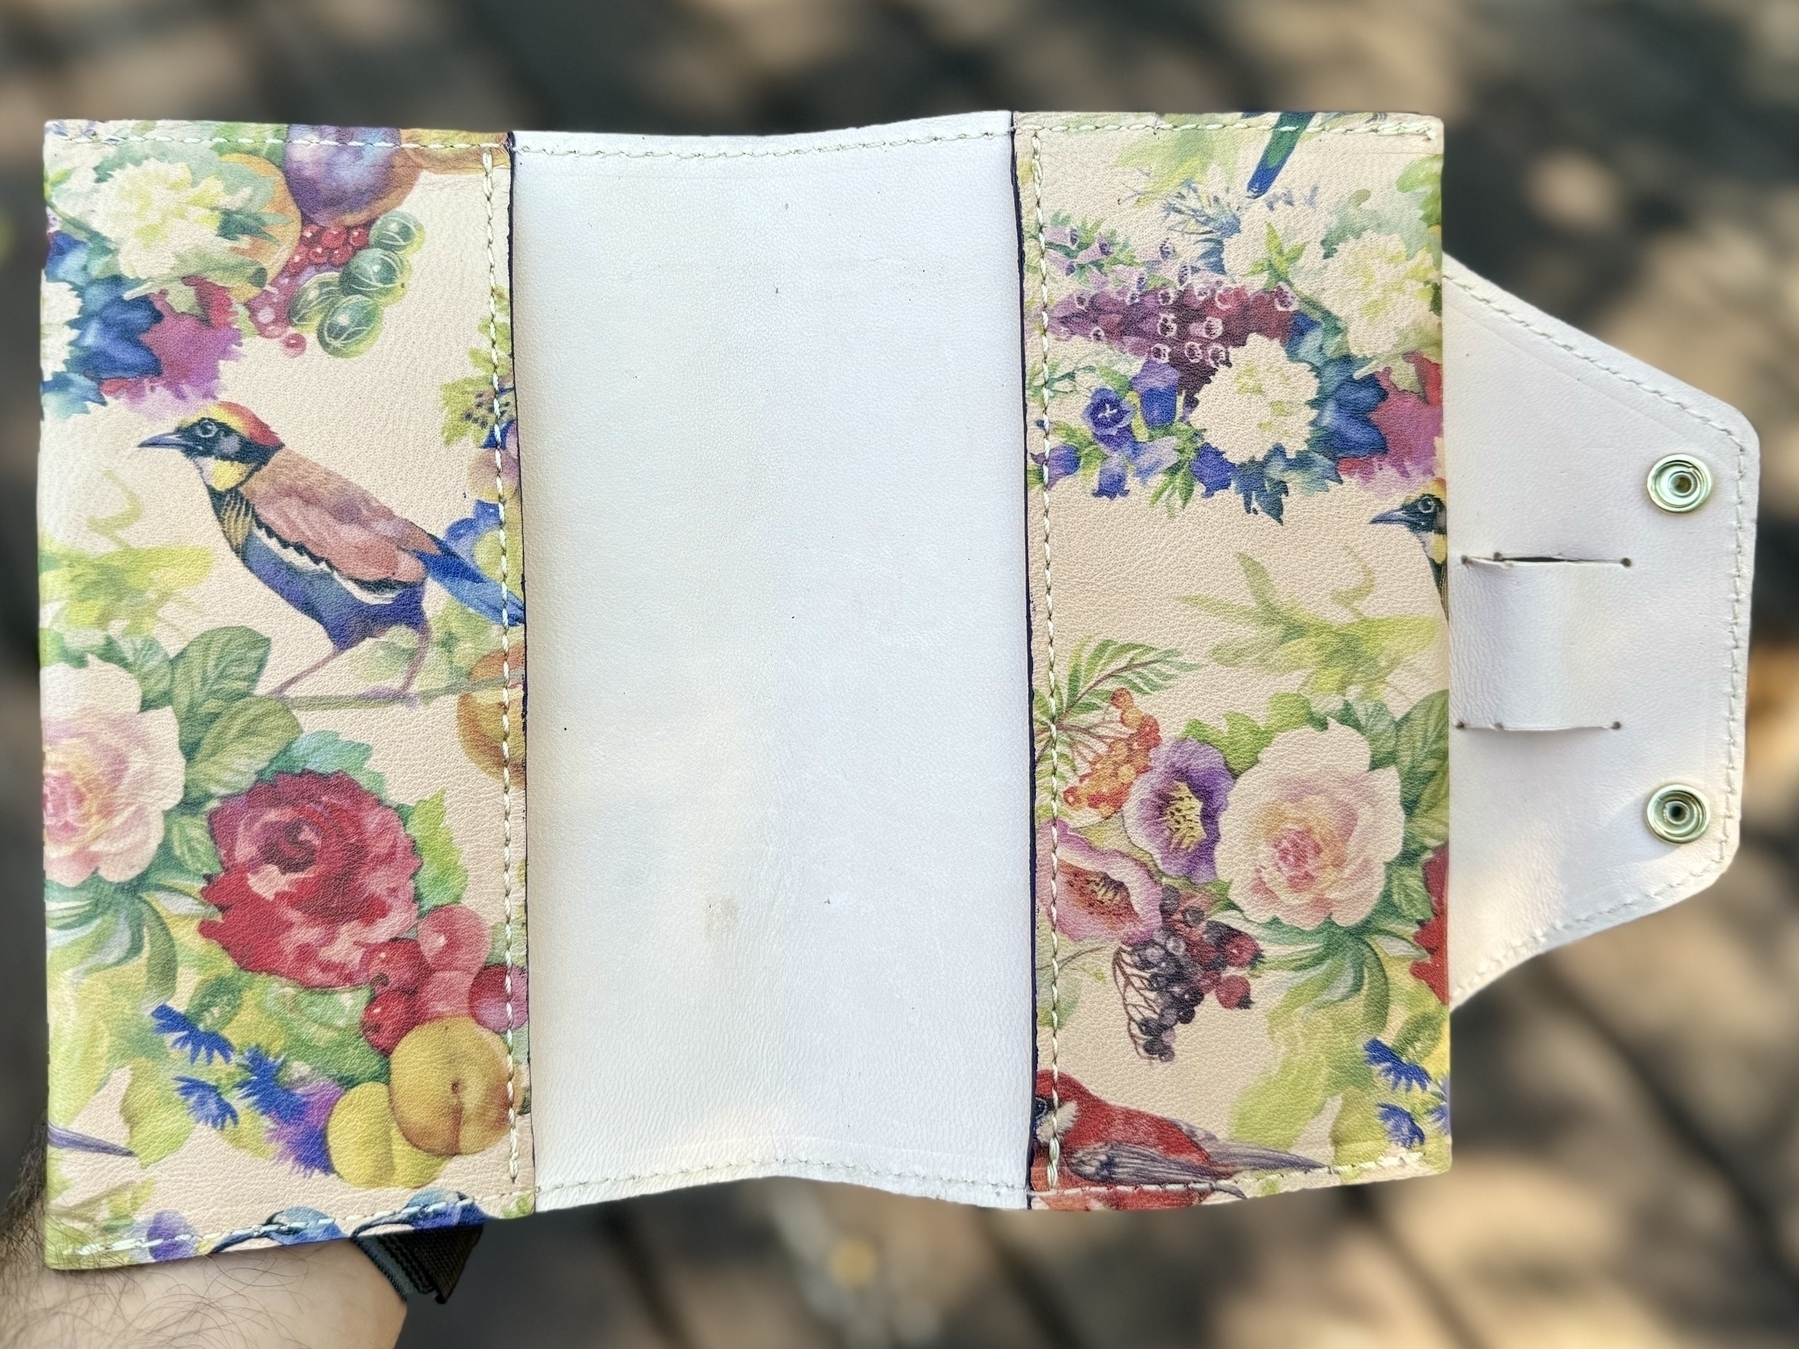 A floral and bird patterned wallet with two side flaps and a central pocket is open, displaying its interior.